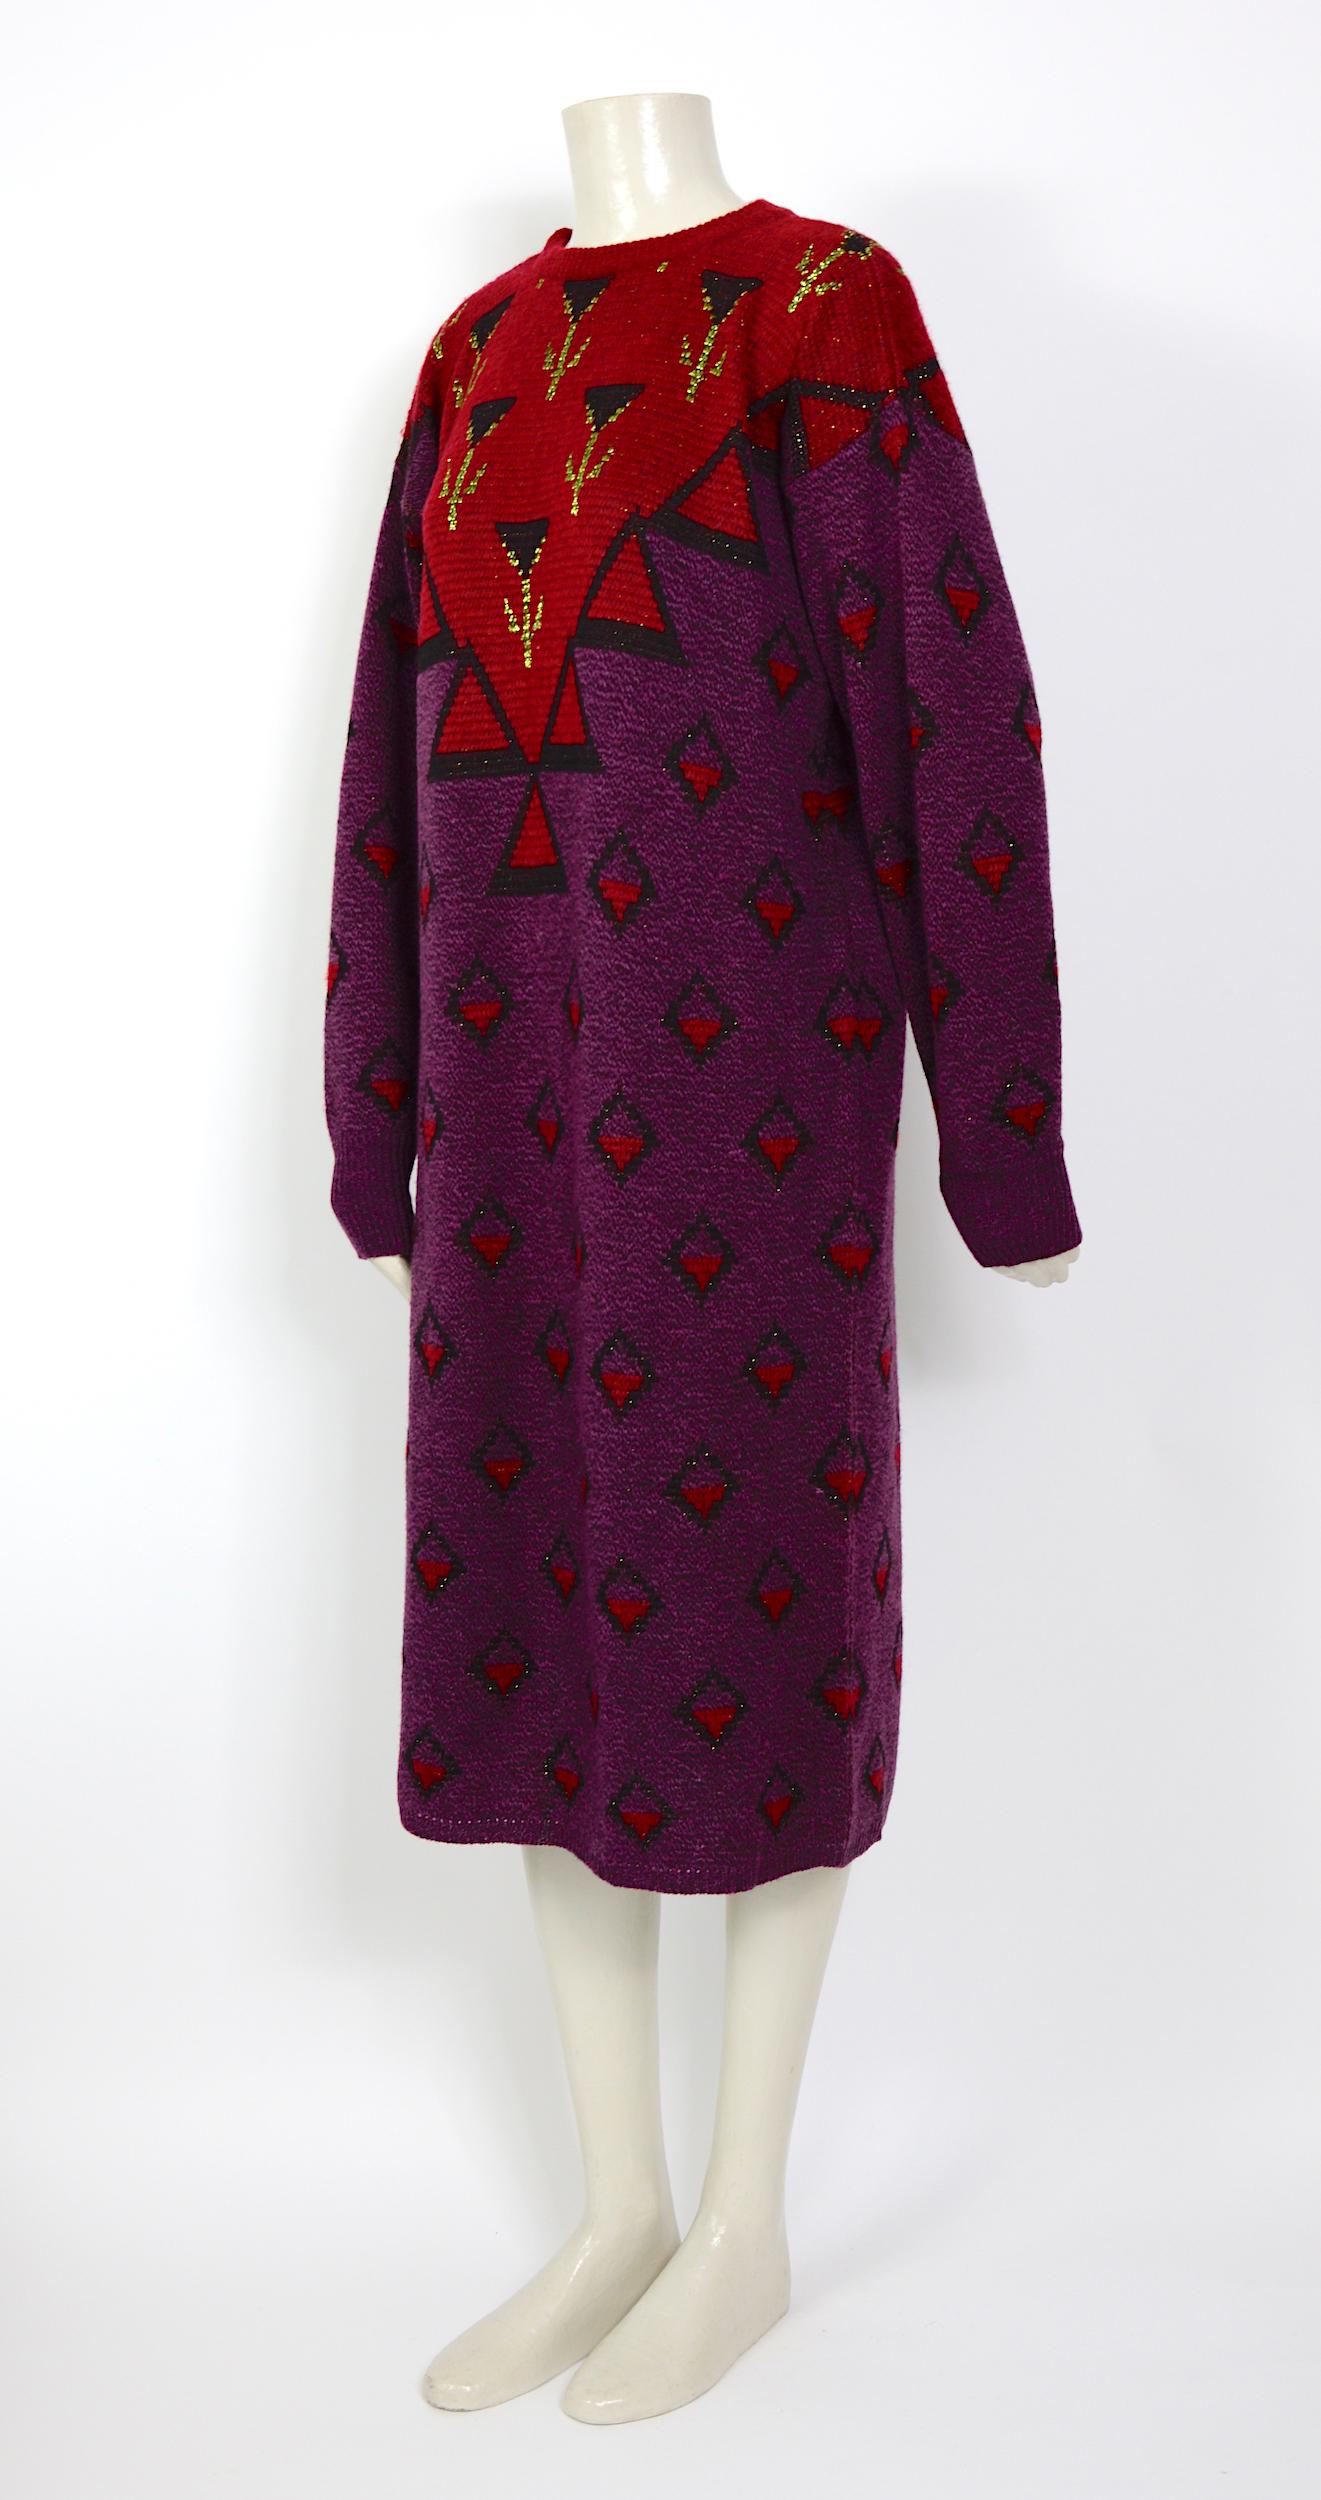 Fashion knitwear will be at the peak of popularity in the autumn-winter of 2021-2022, and this Yves Saint Laurent tricot vintage piece will not go unnoticed.
Beautiful soft and unworn condition. made in a purple mix of wool, mohair, and some